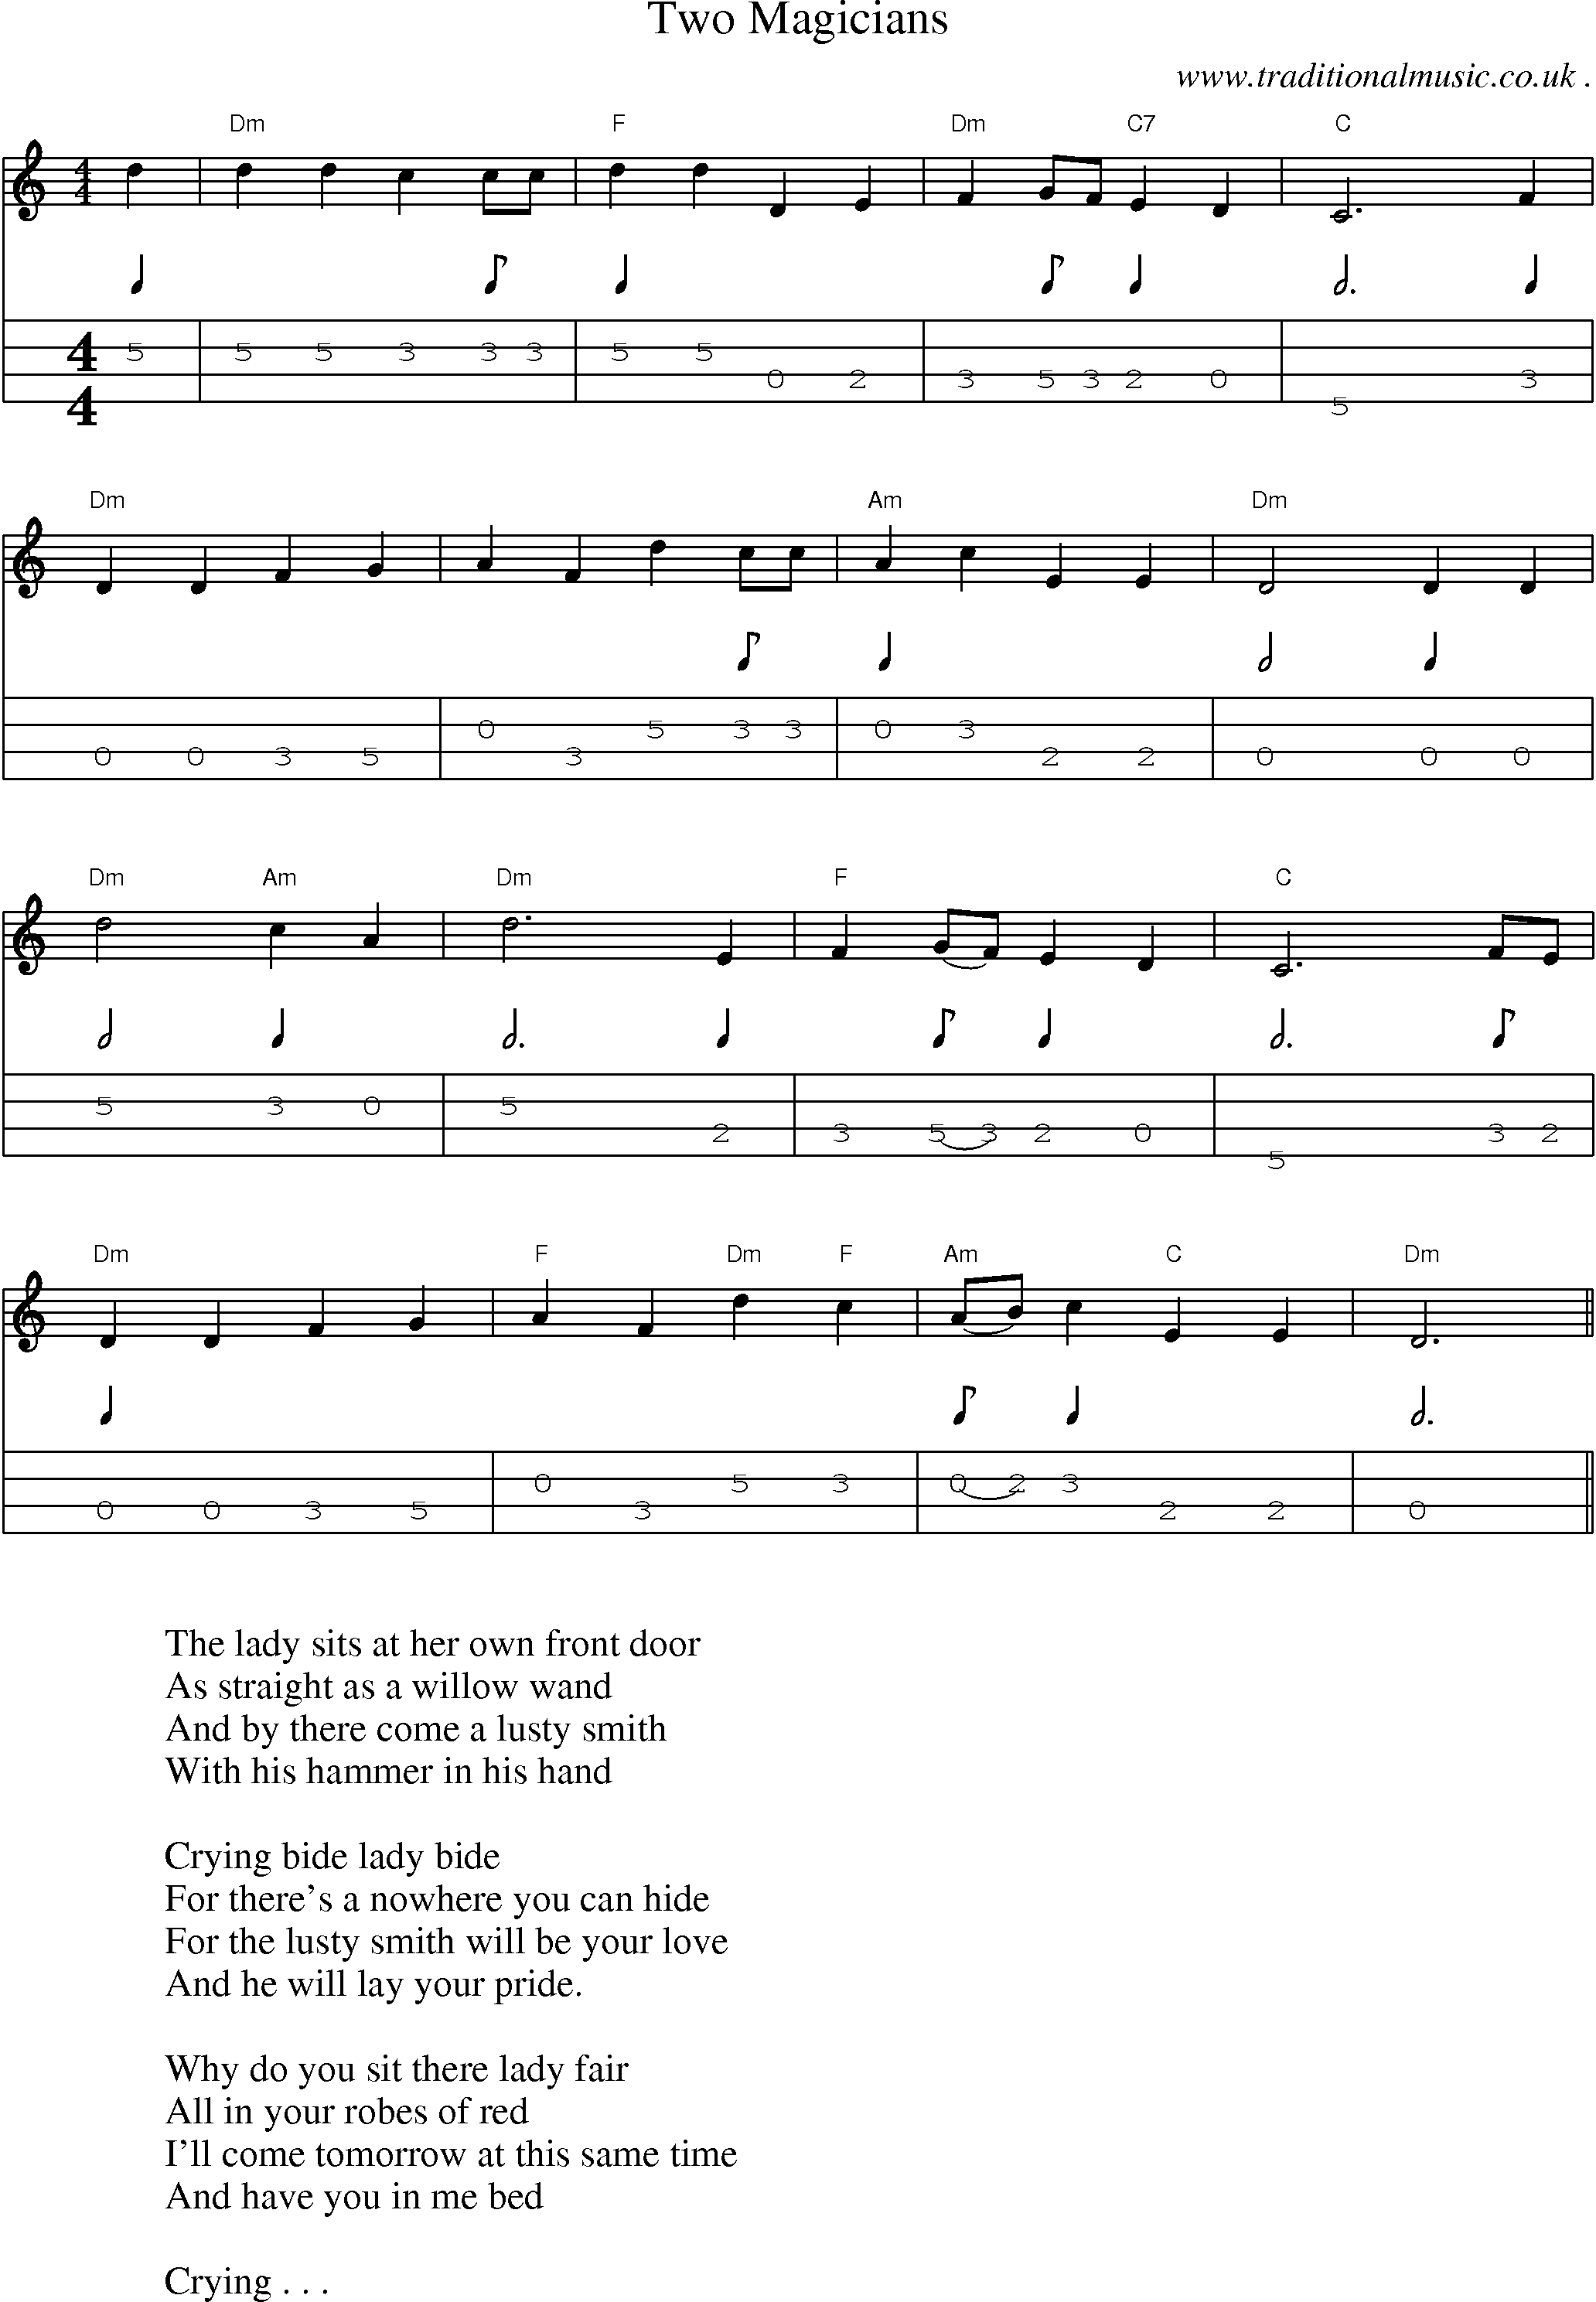 Sheet-Music and Mandolin Tabs for Two Magicians